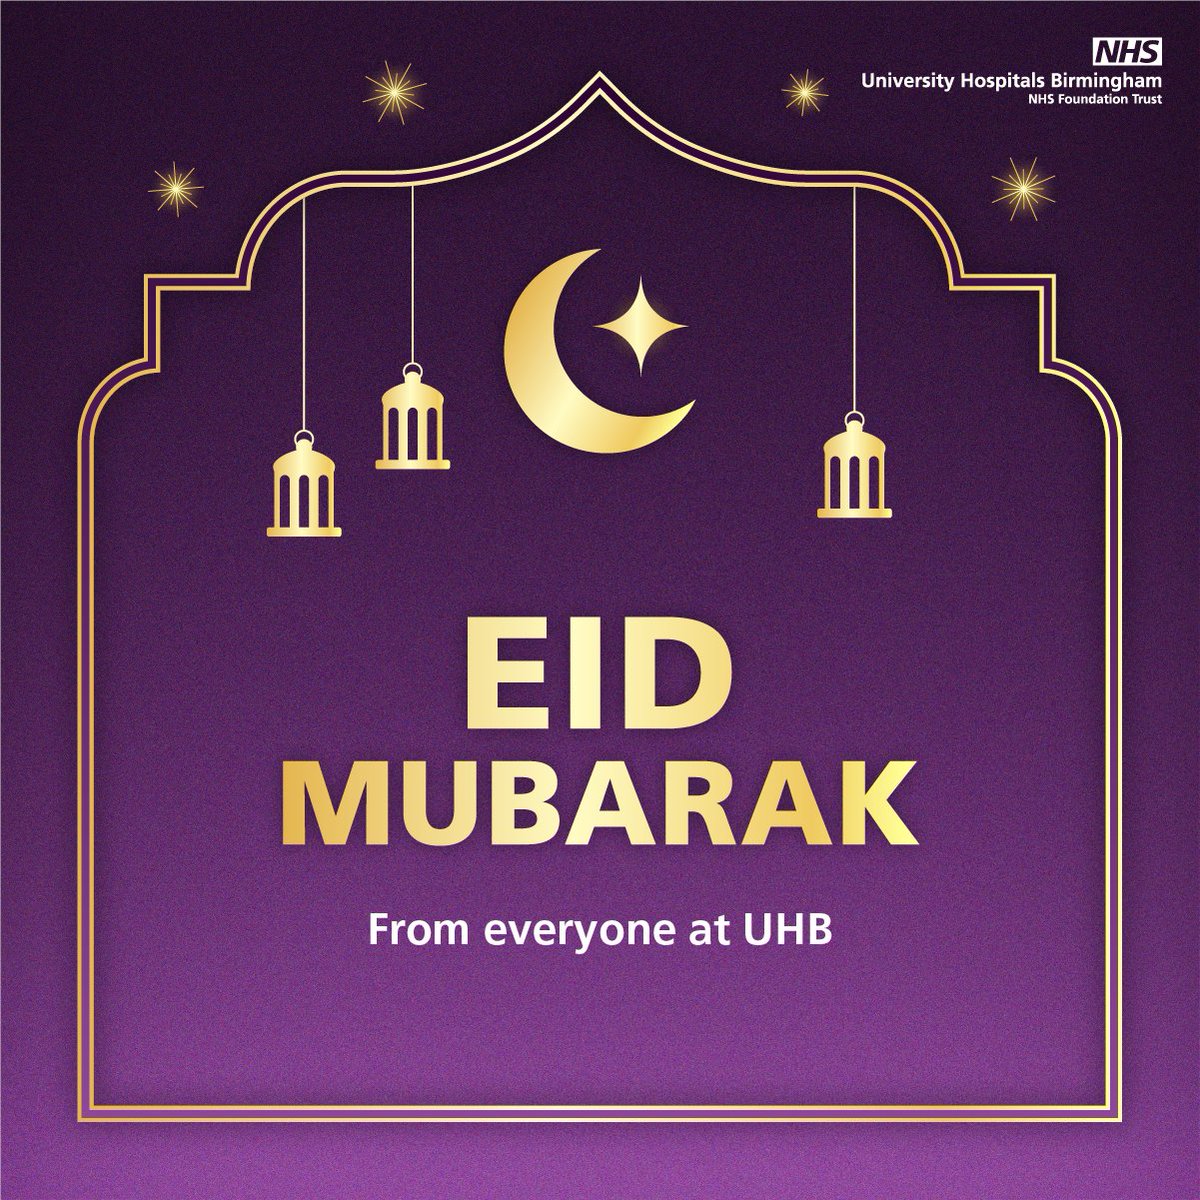 Eid Mubarak to all those celebrating ☪ As the holy month of Ramadan draws to a close, we are wishing all Muslims across Birmingham and Solihull a happy and blessed Eid al-Fitr, from all of us at #teamUHB.